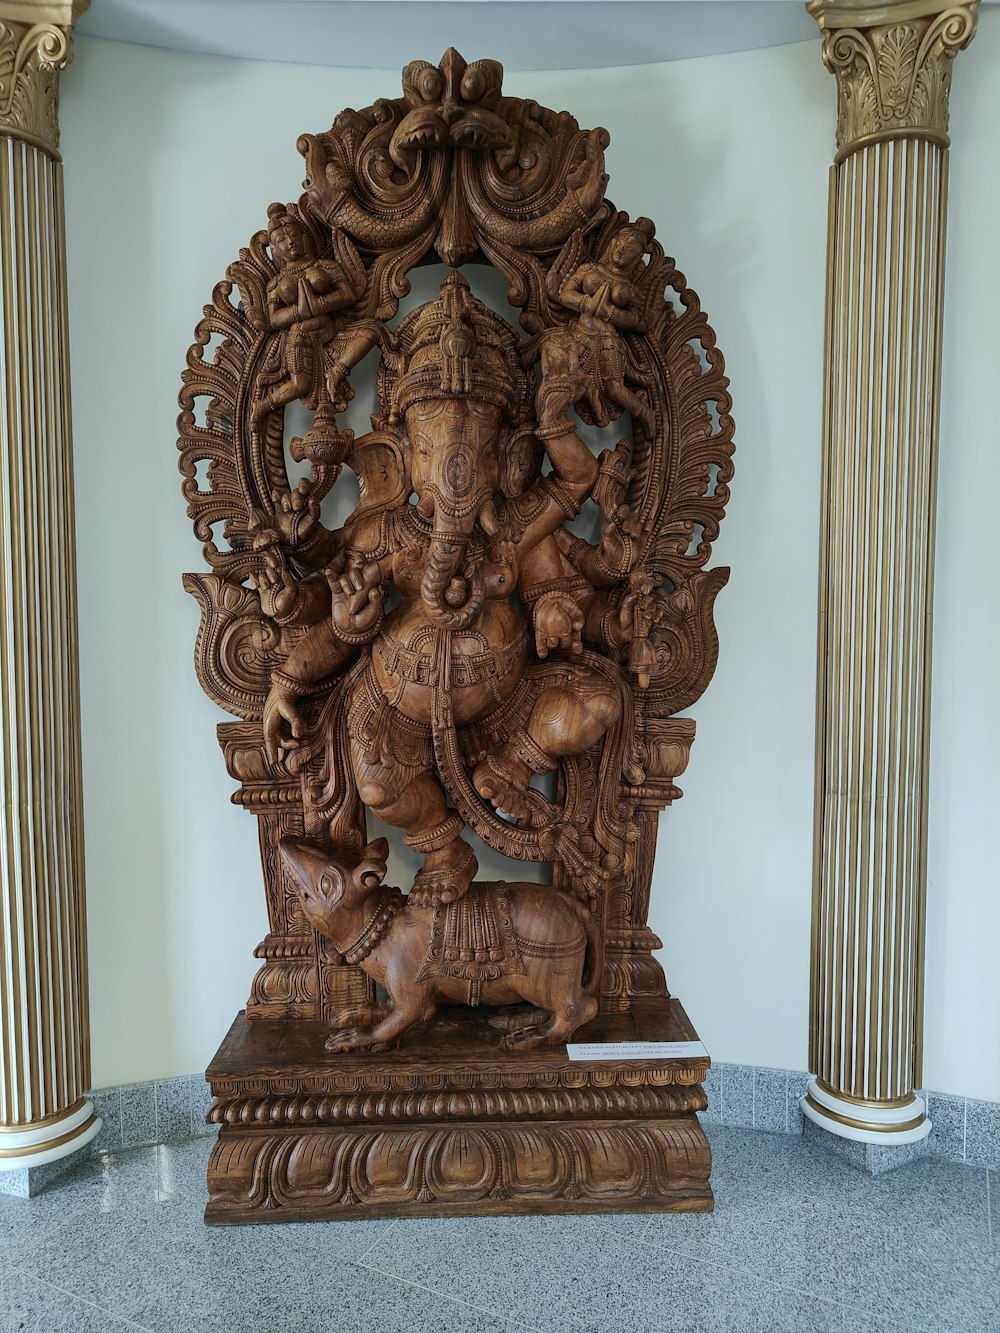 a wooden statue of a god in a room